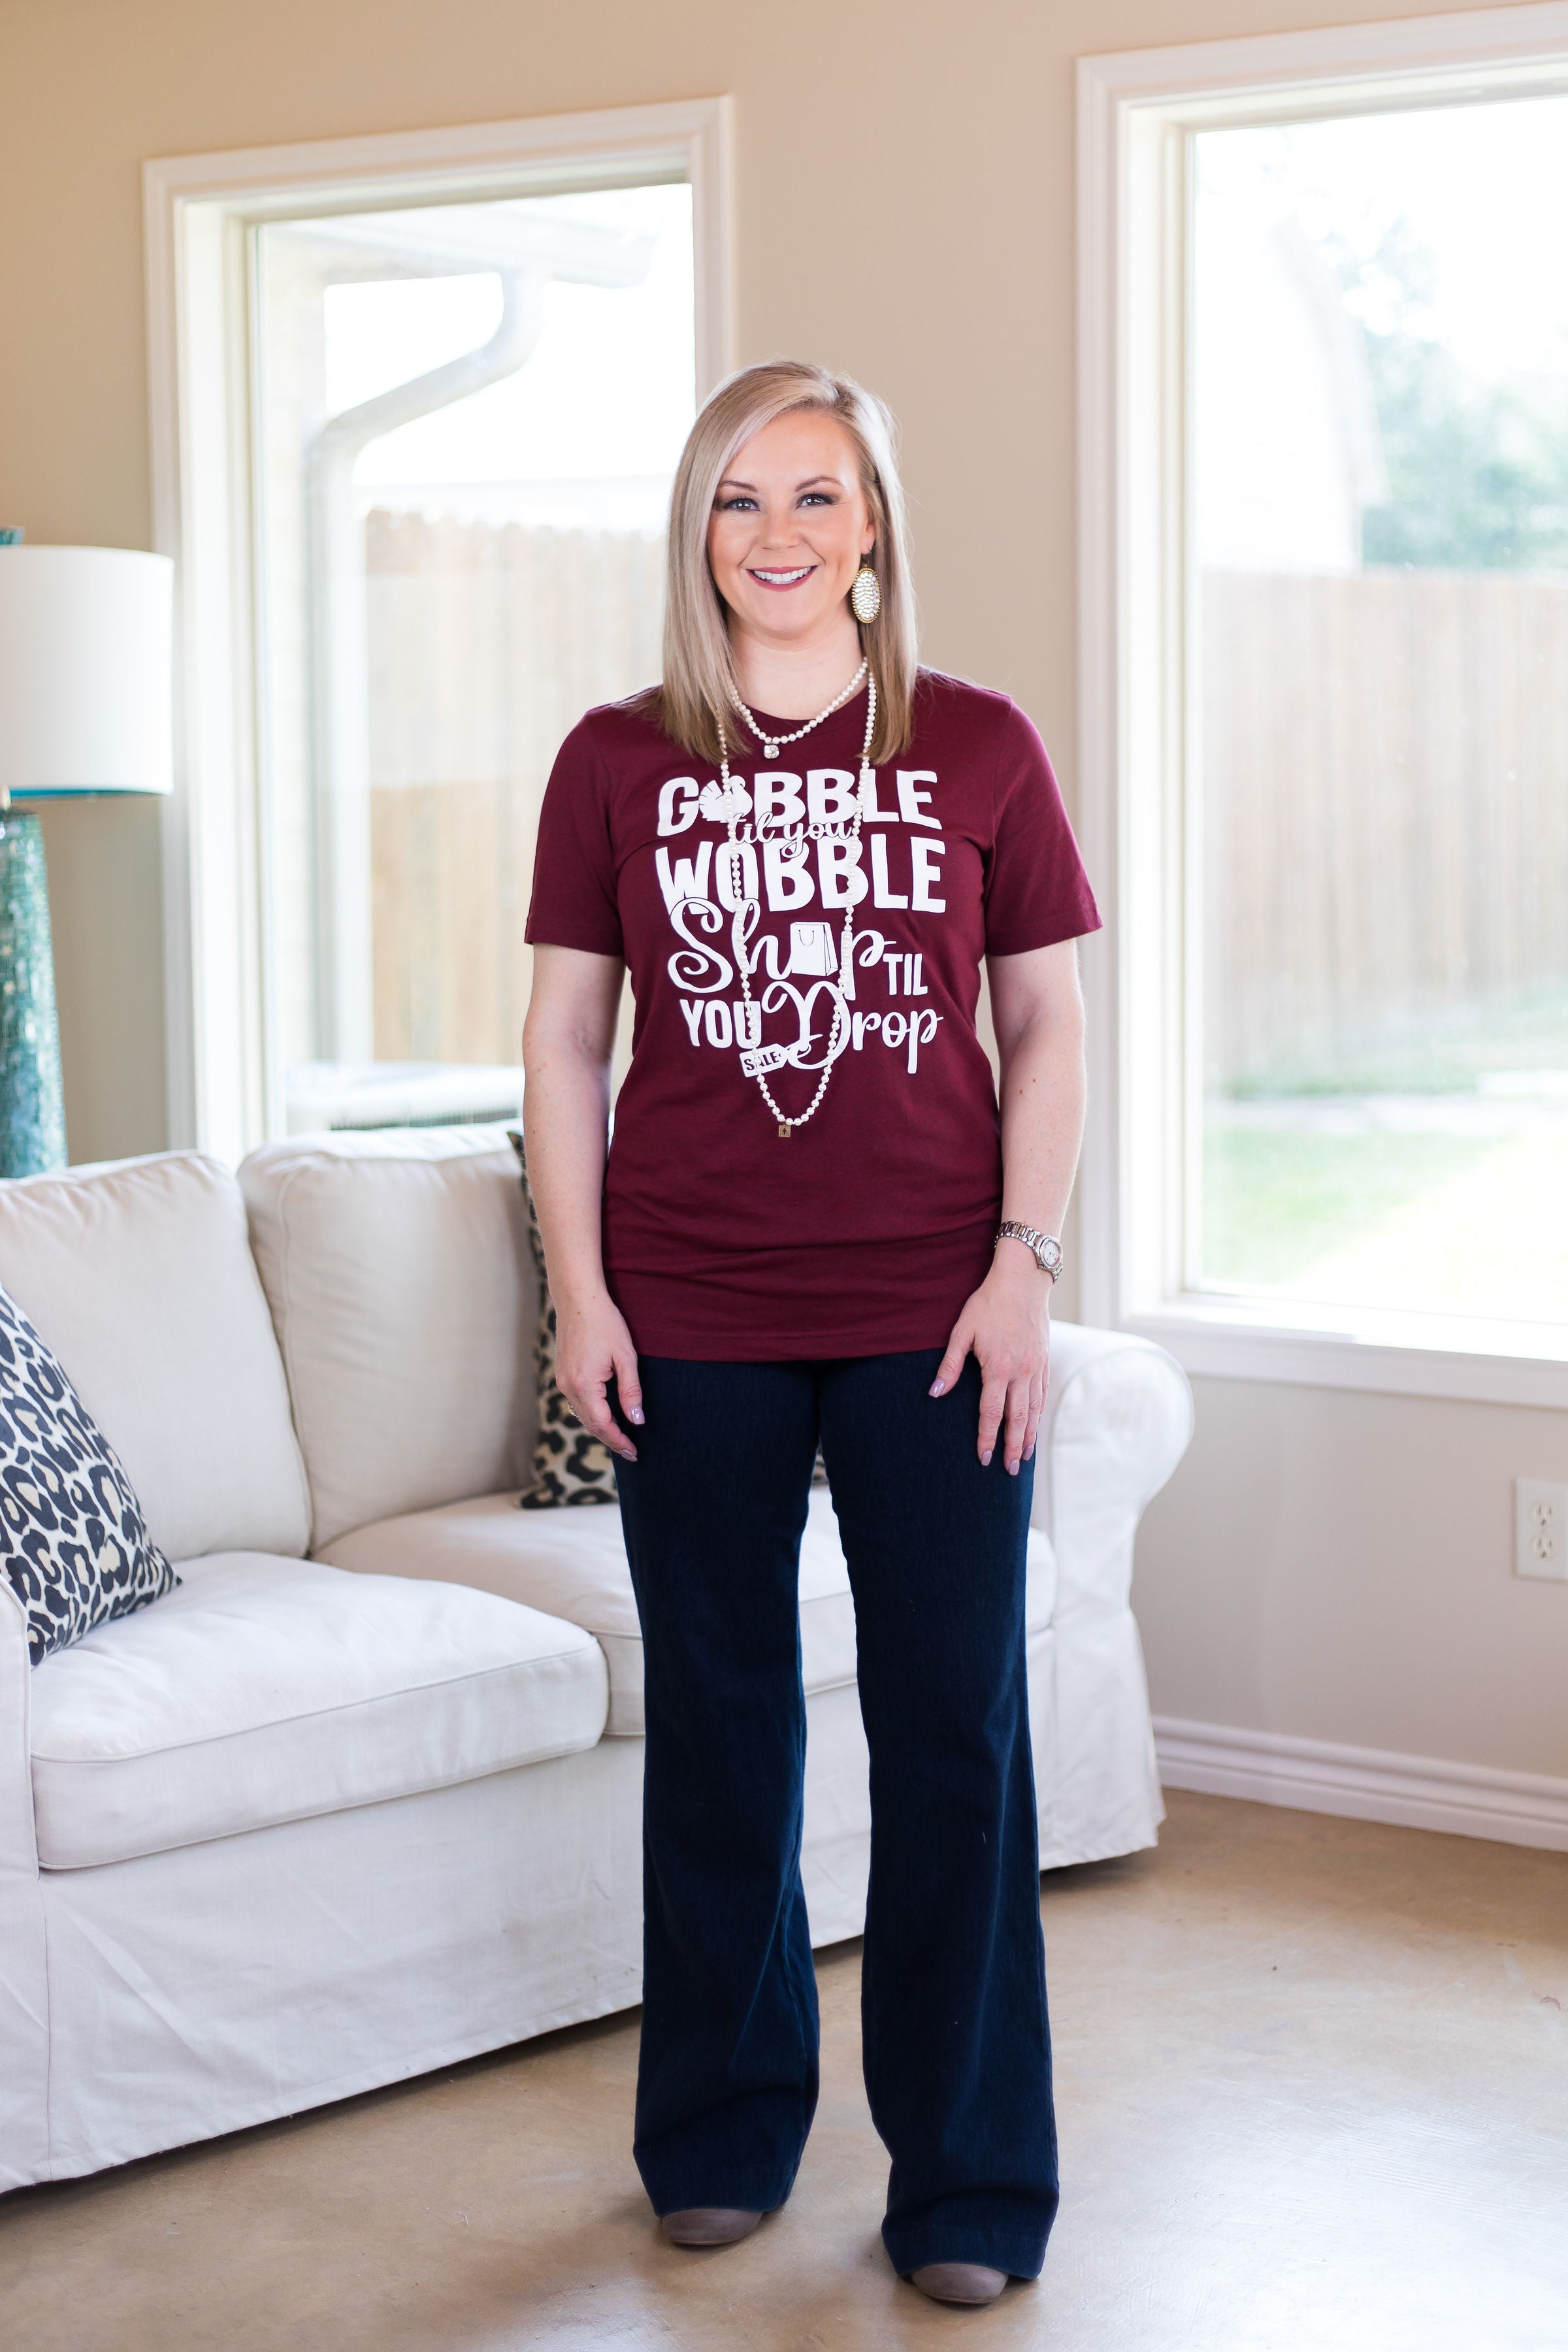 Last Chance Size Small | Gobble Til You Wobble Shop Til You Drop Short Sleeve Tee Shirt in Maroon